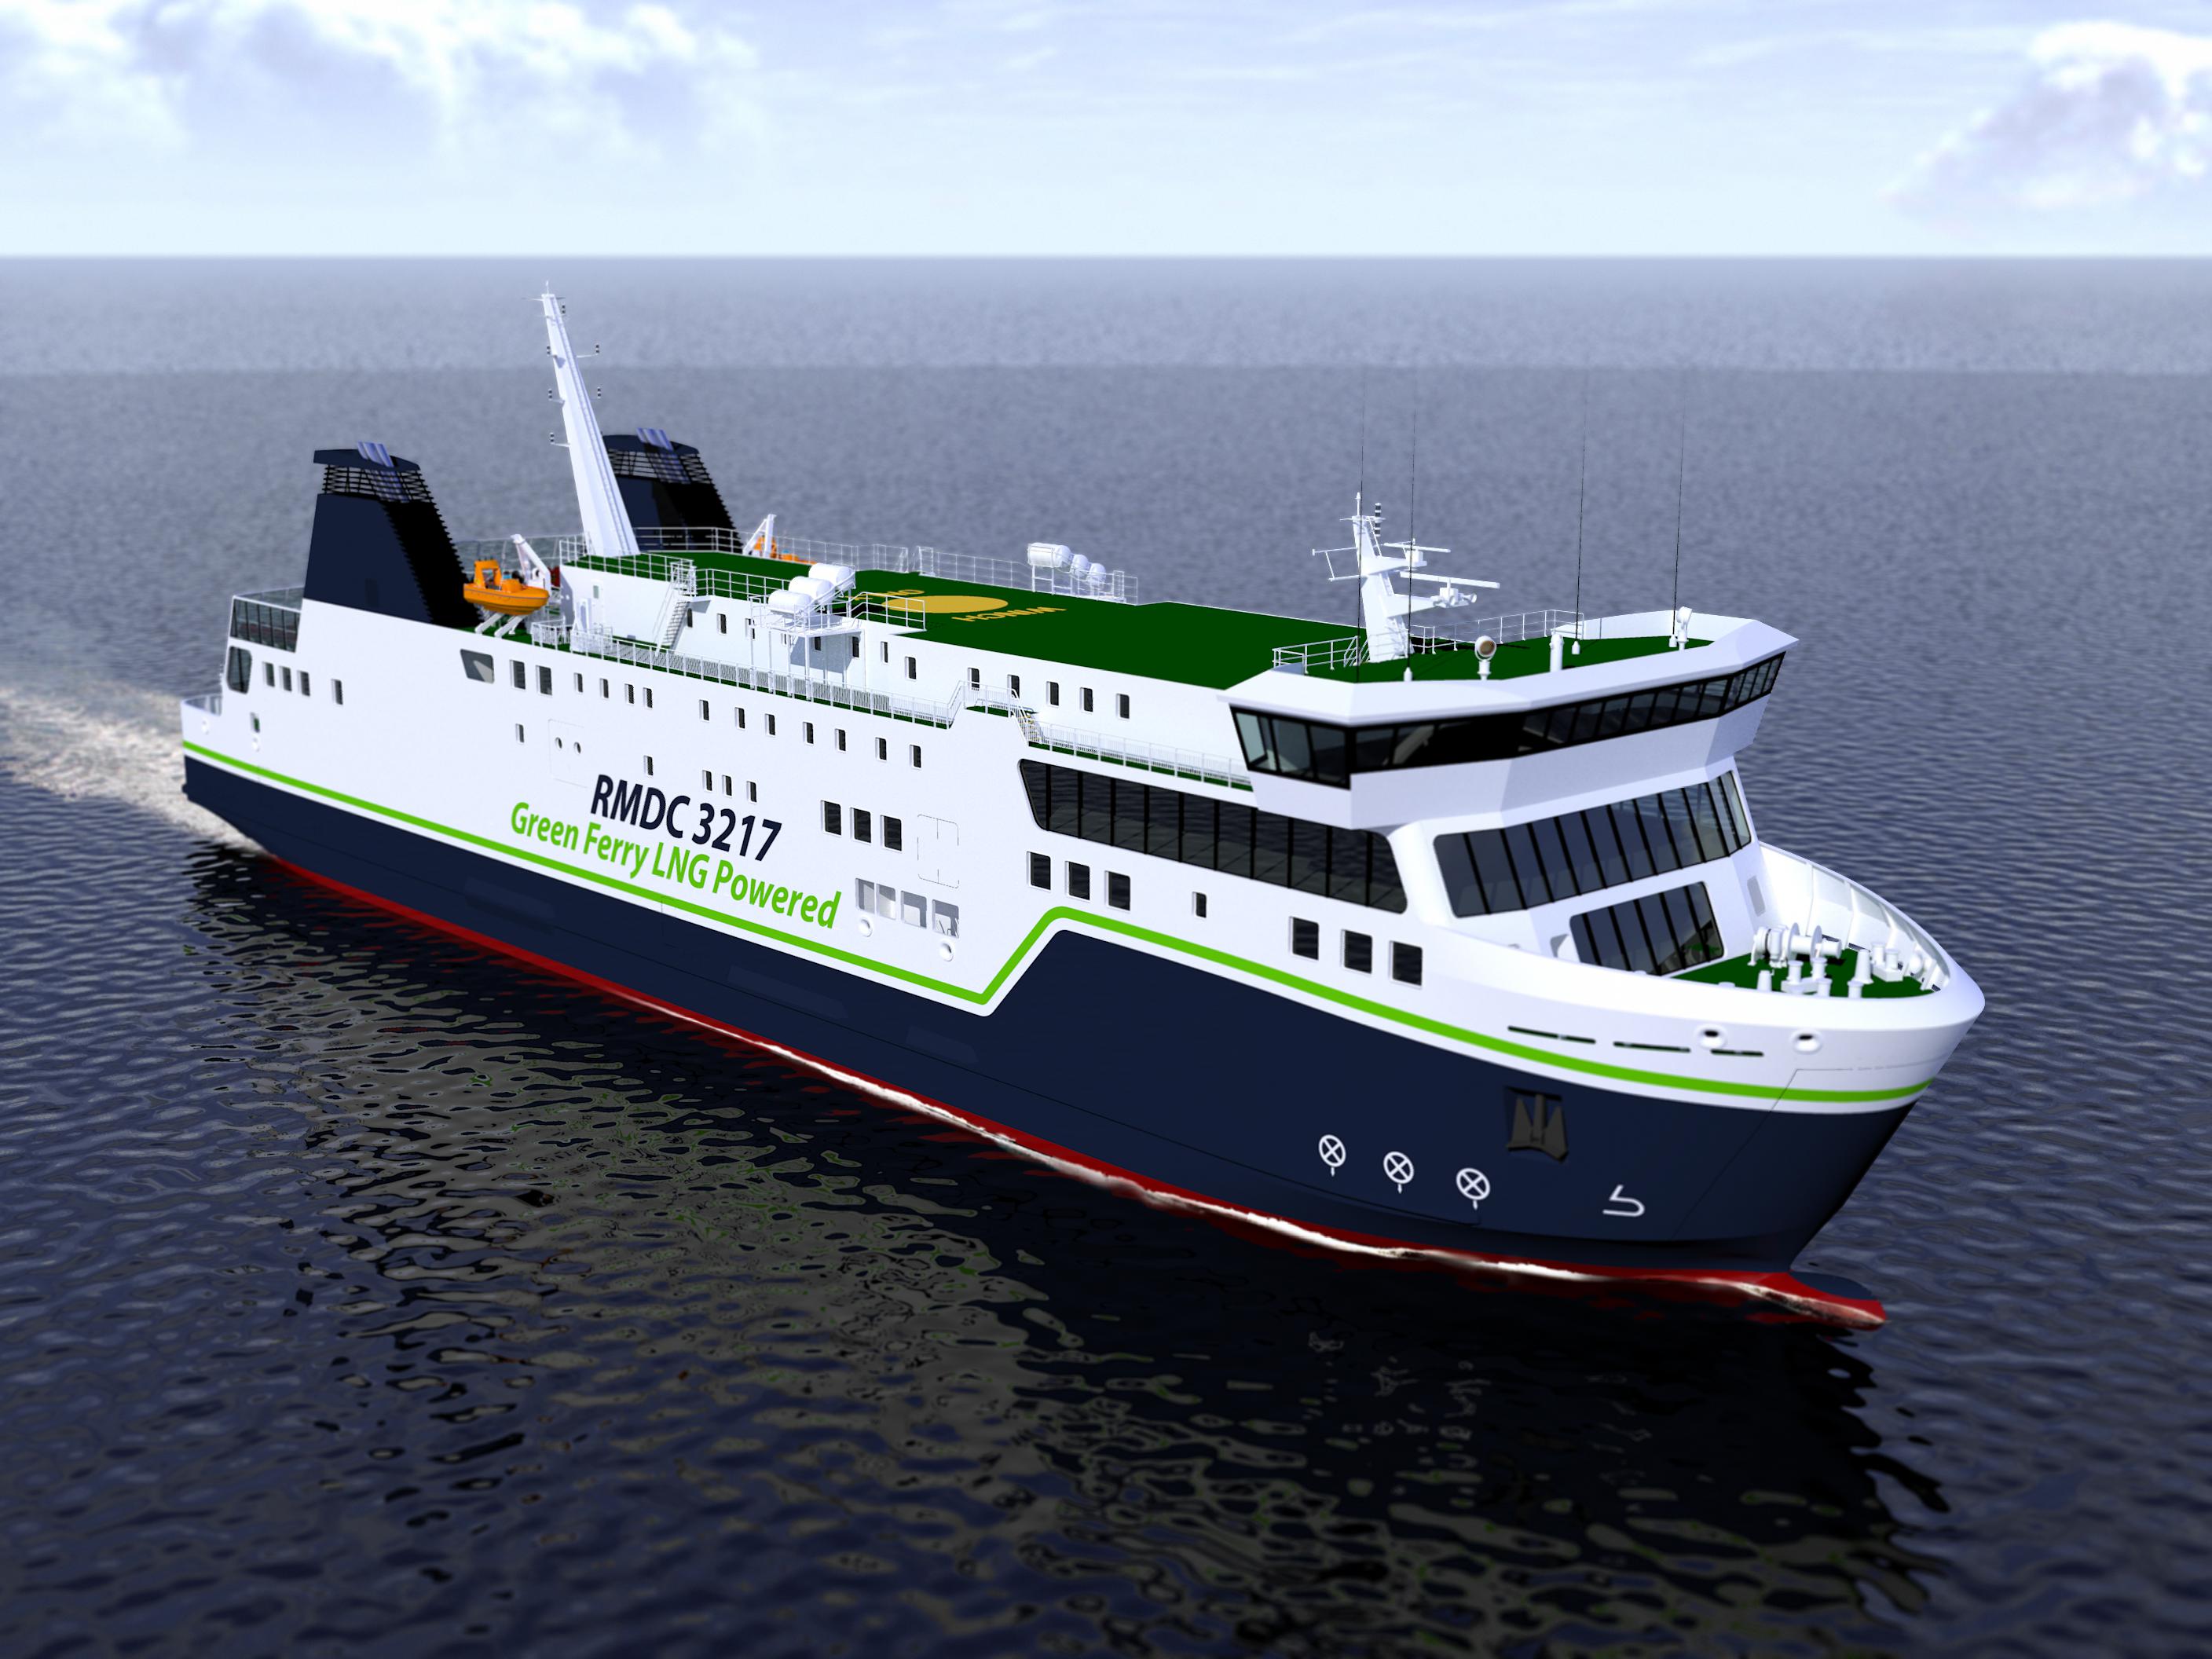 Remontowa Marine Design & Consulting Sp. z o.o. has launched new project of LNG powered car passenger ferry RMDC 3217 dedicated for European and North American market - MarinePoland.com